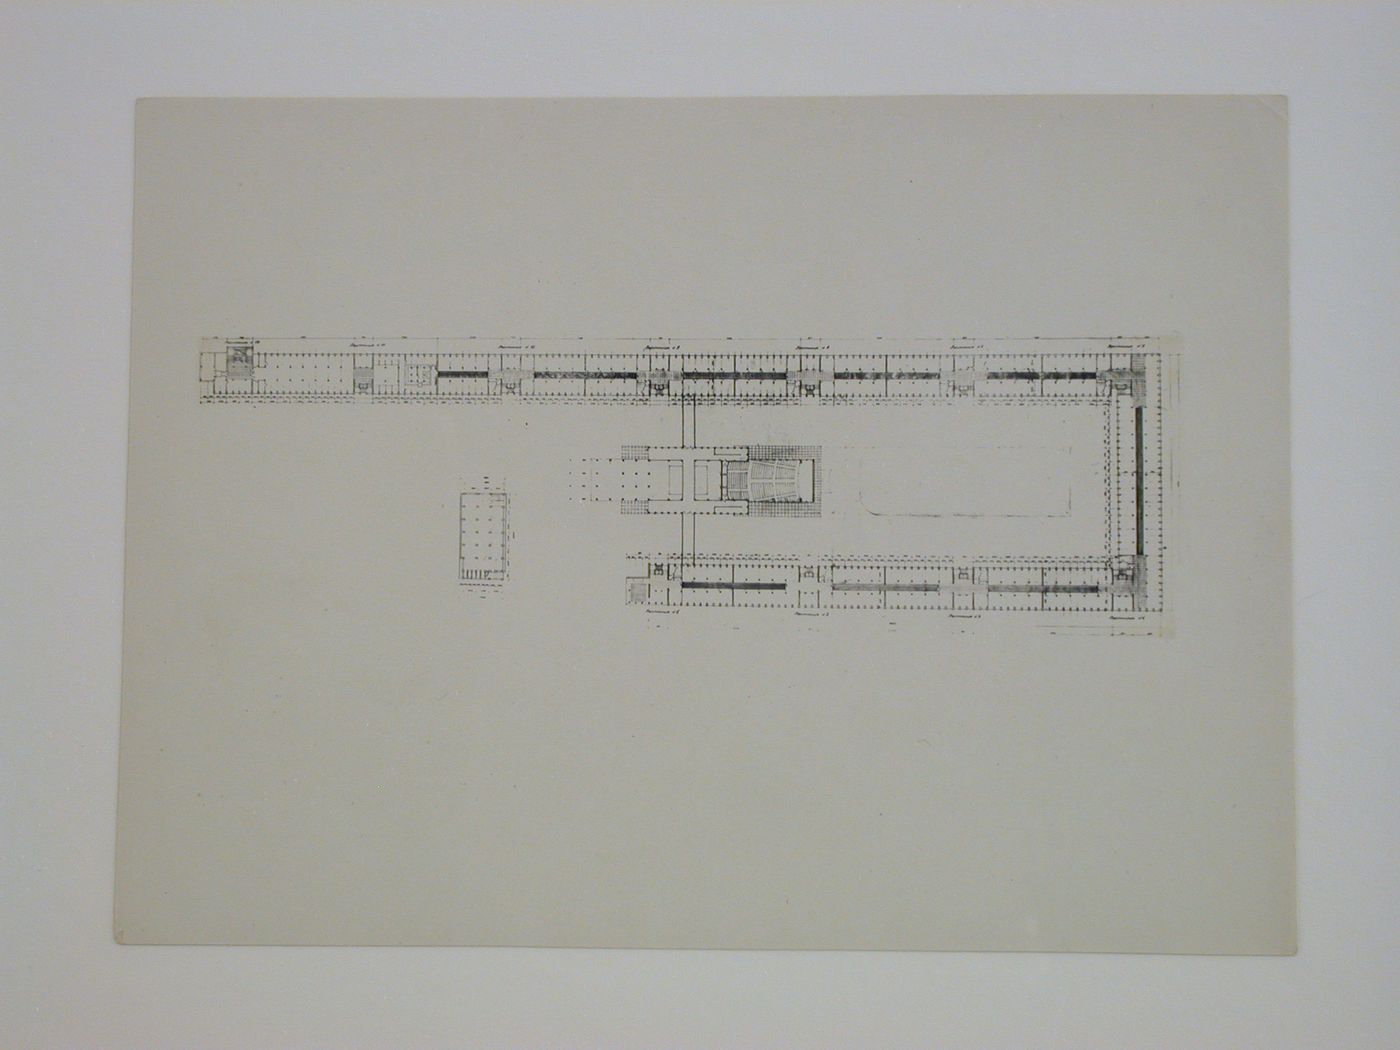 Photograph of a plan for the Building of Industry, Sverdlovsk, Soviet Union (now Ekaterinburg, Russia)